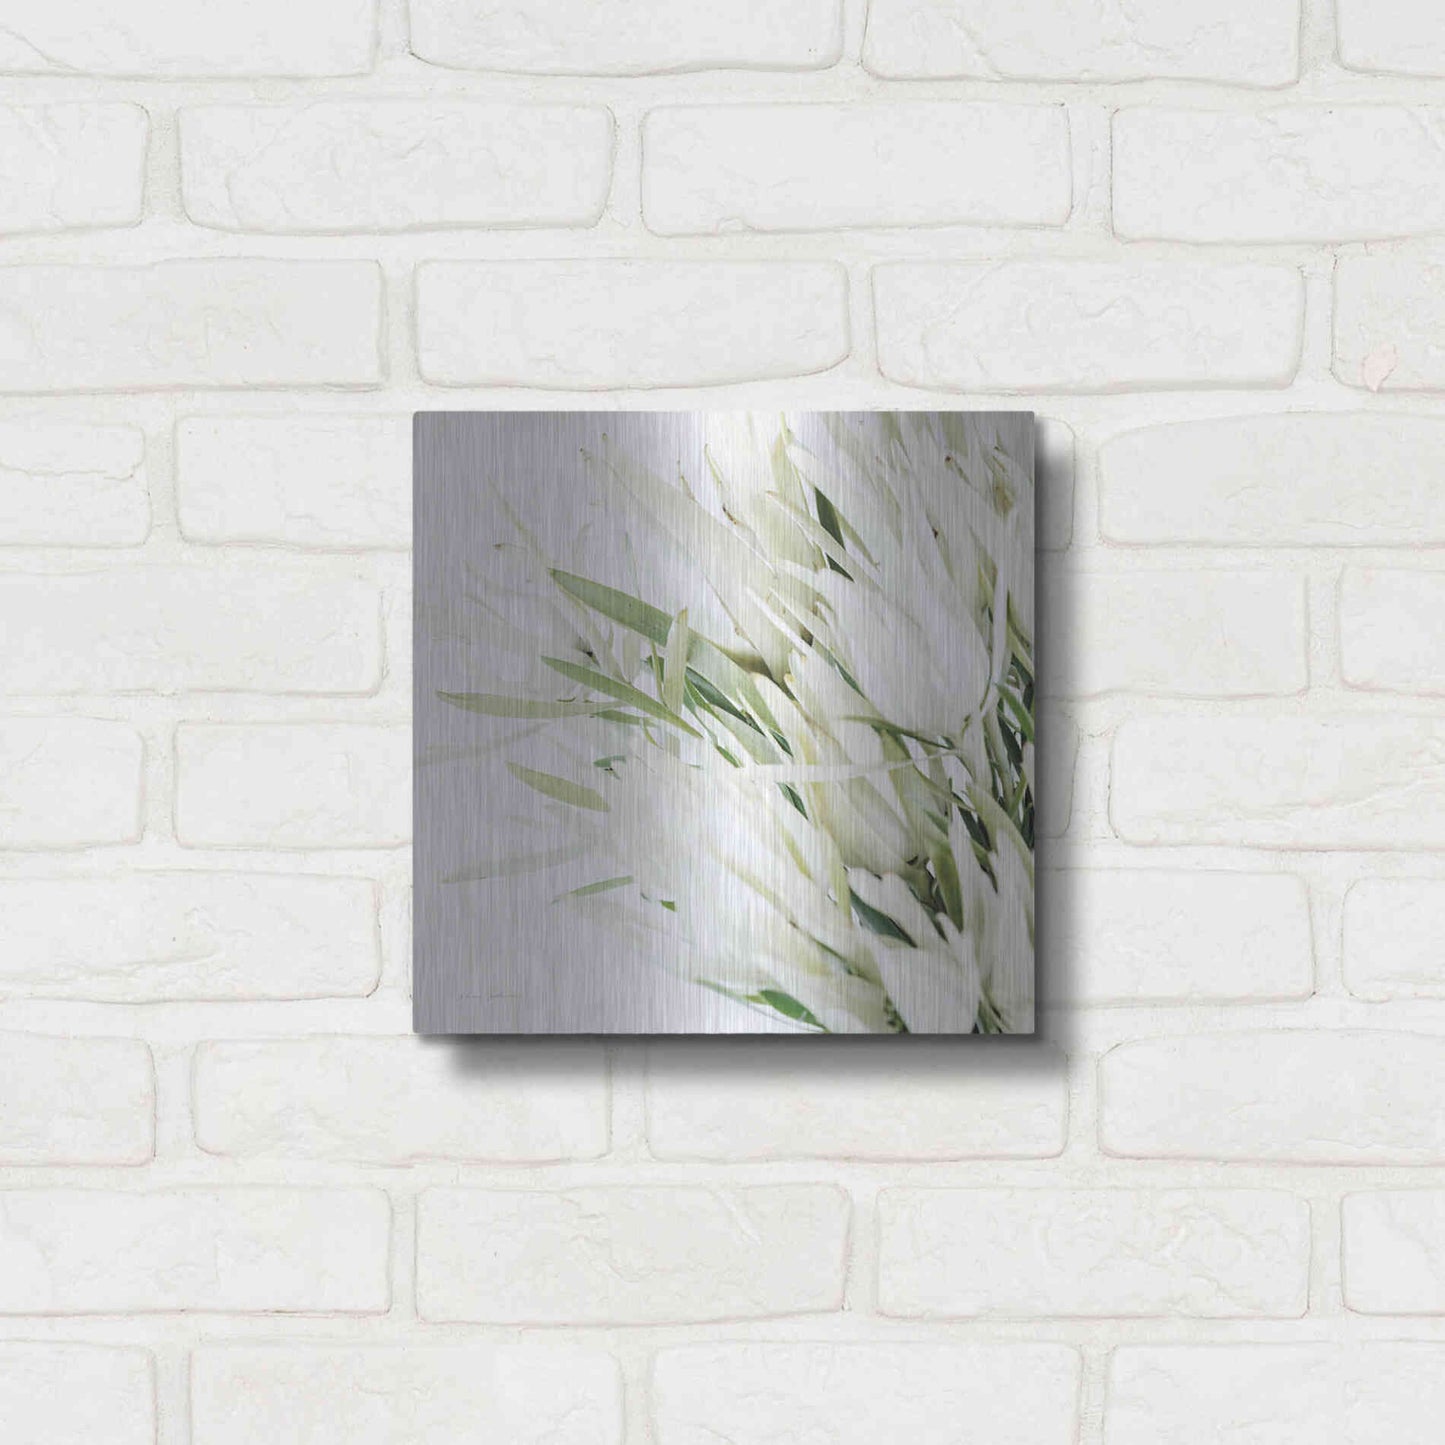 Luxe Metal Art 'Leucadendron Oasis Crop' by Elise Catterall, Metal Wall Art,12x12